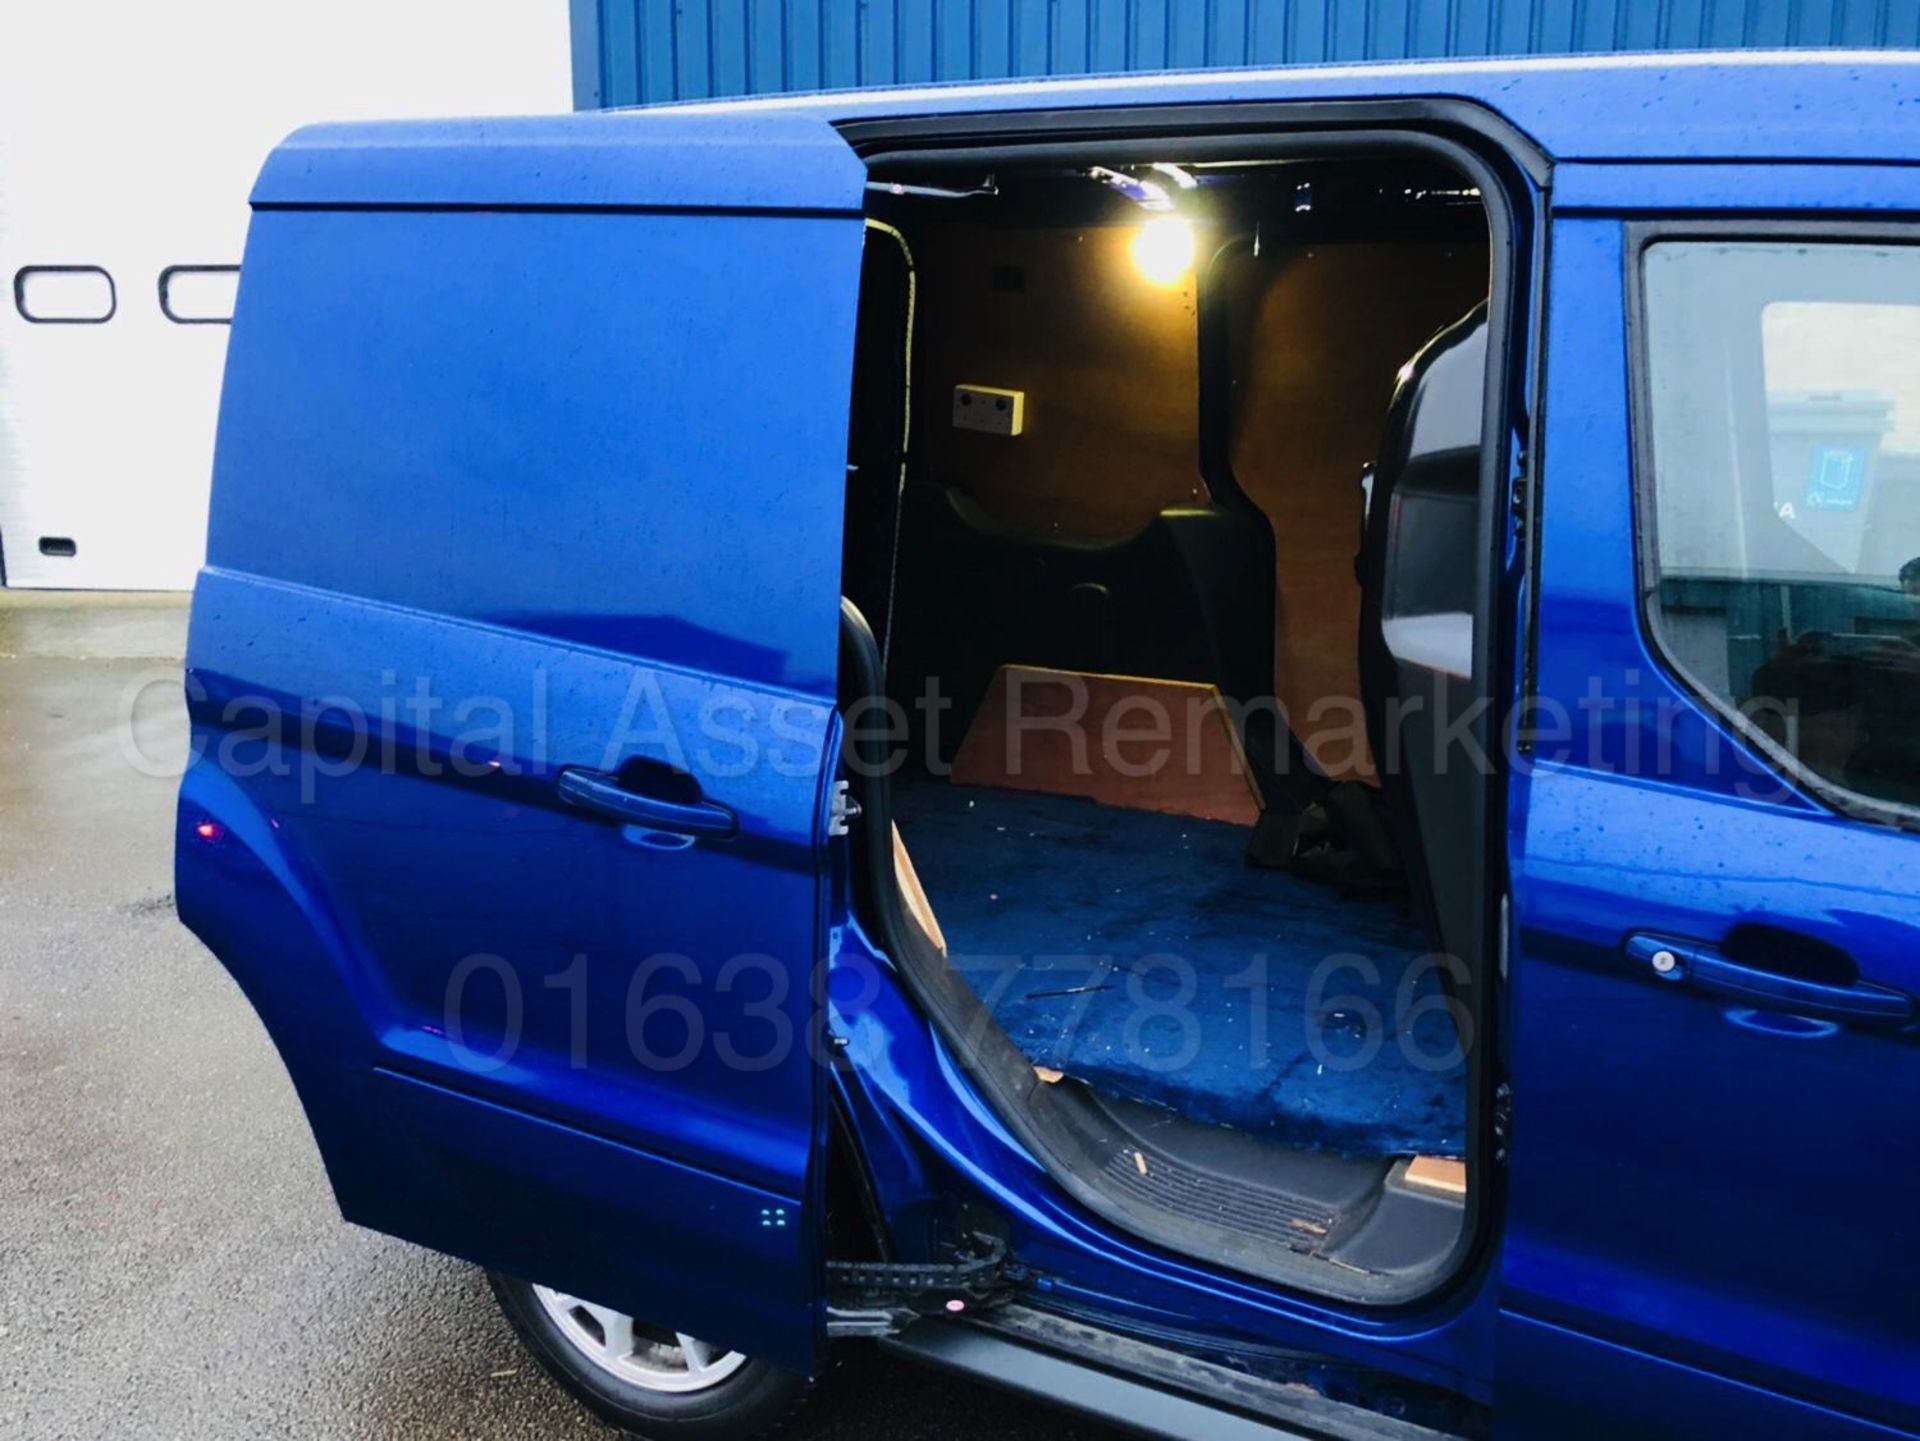 FORD TRANSIT CONNECT 'LIMITED' (2015 - FACELIFT MODEL) '1.6 TDCI - 115 PS - 6 SPEED' *A/C* (1 OWNER) - Image 17 of 28